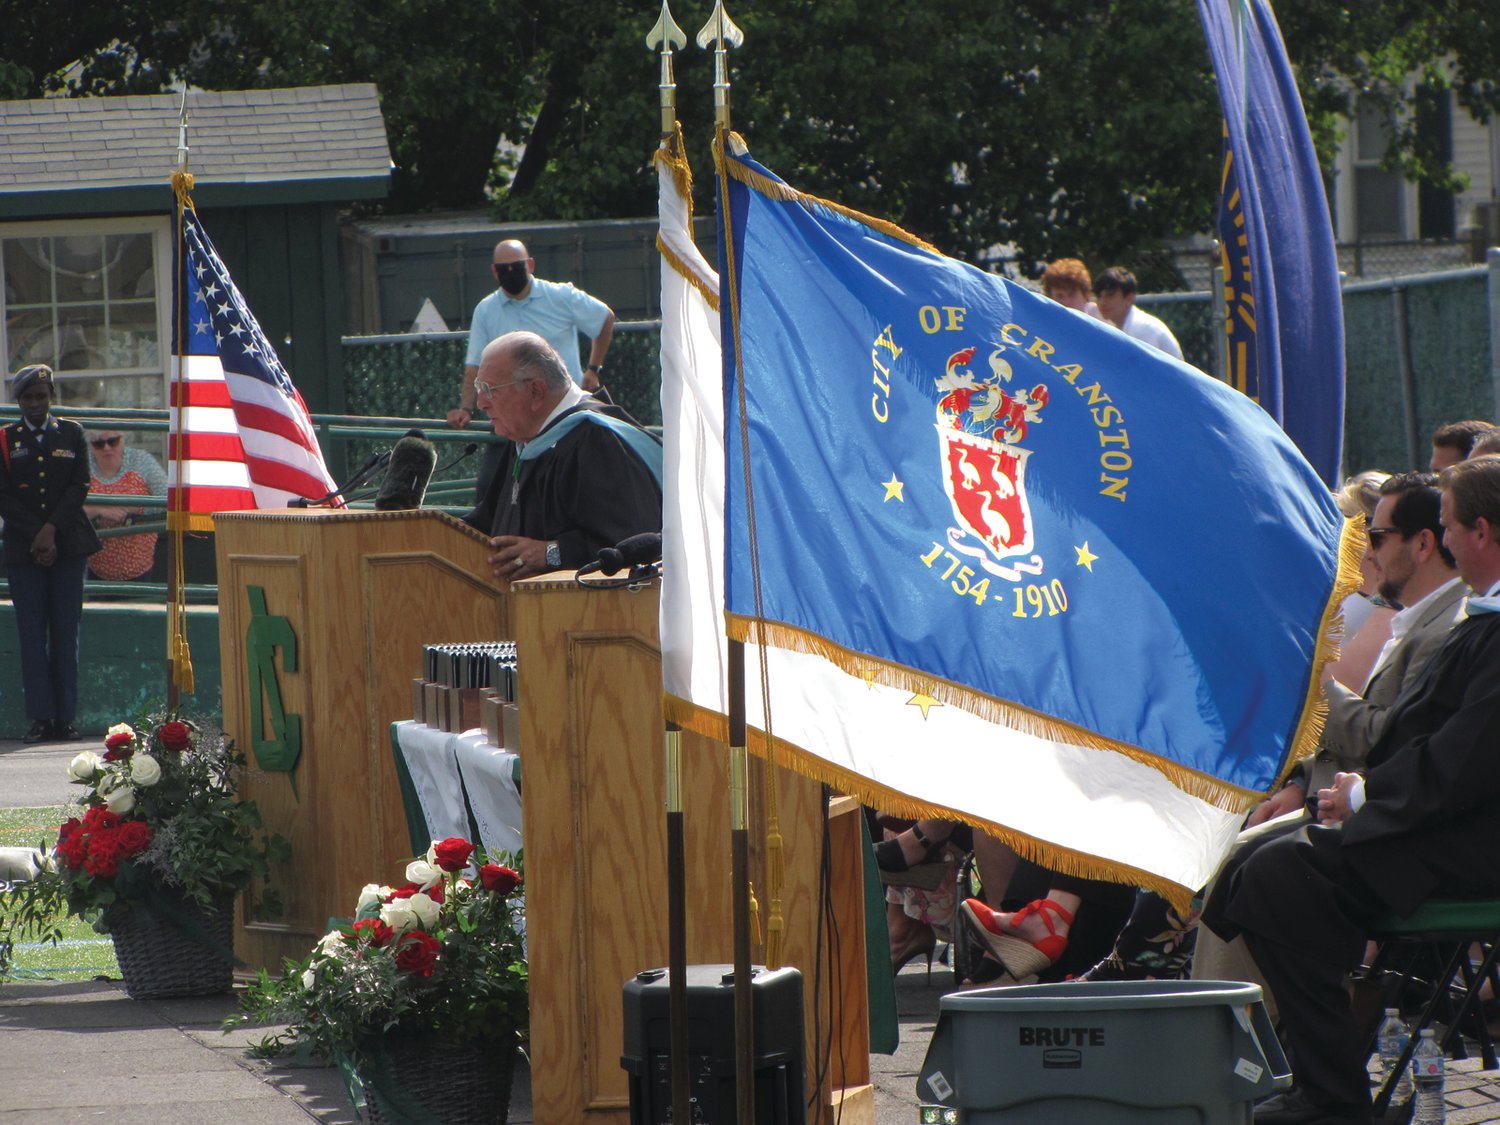 FOREVER PART OF CRANSTON : Michael Traficante, former mayor and current citywide representative on the School Committee, delivered remarks that he acknowledged were not “traditional.” Among his words of advice to the graduates? “Always be kind to your knees.”